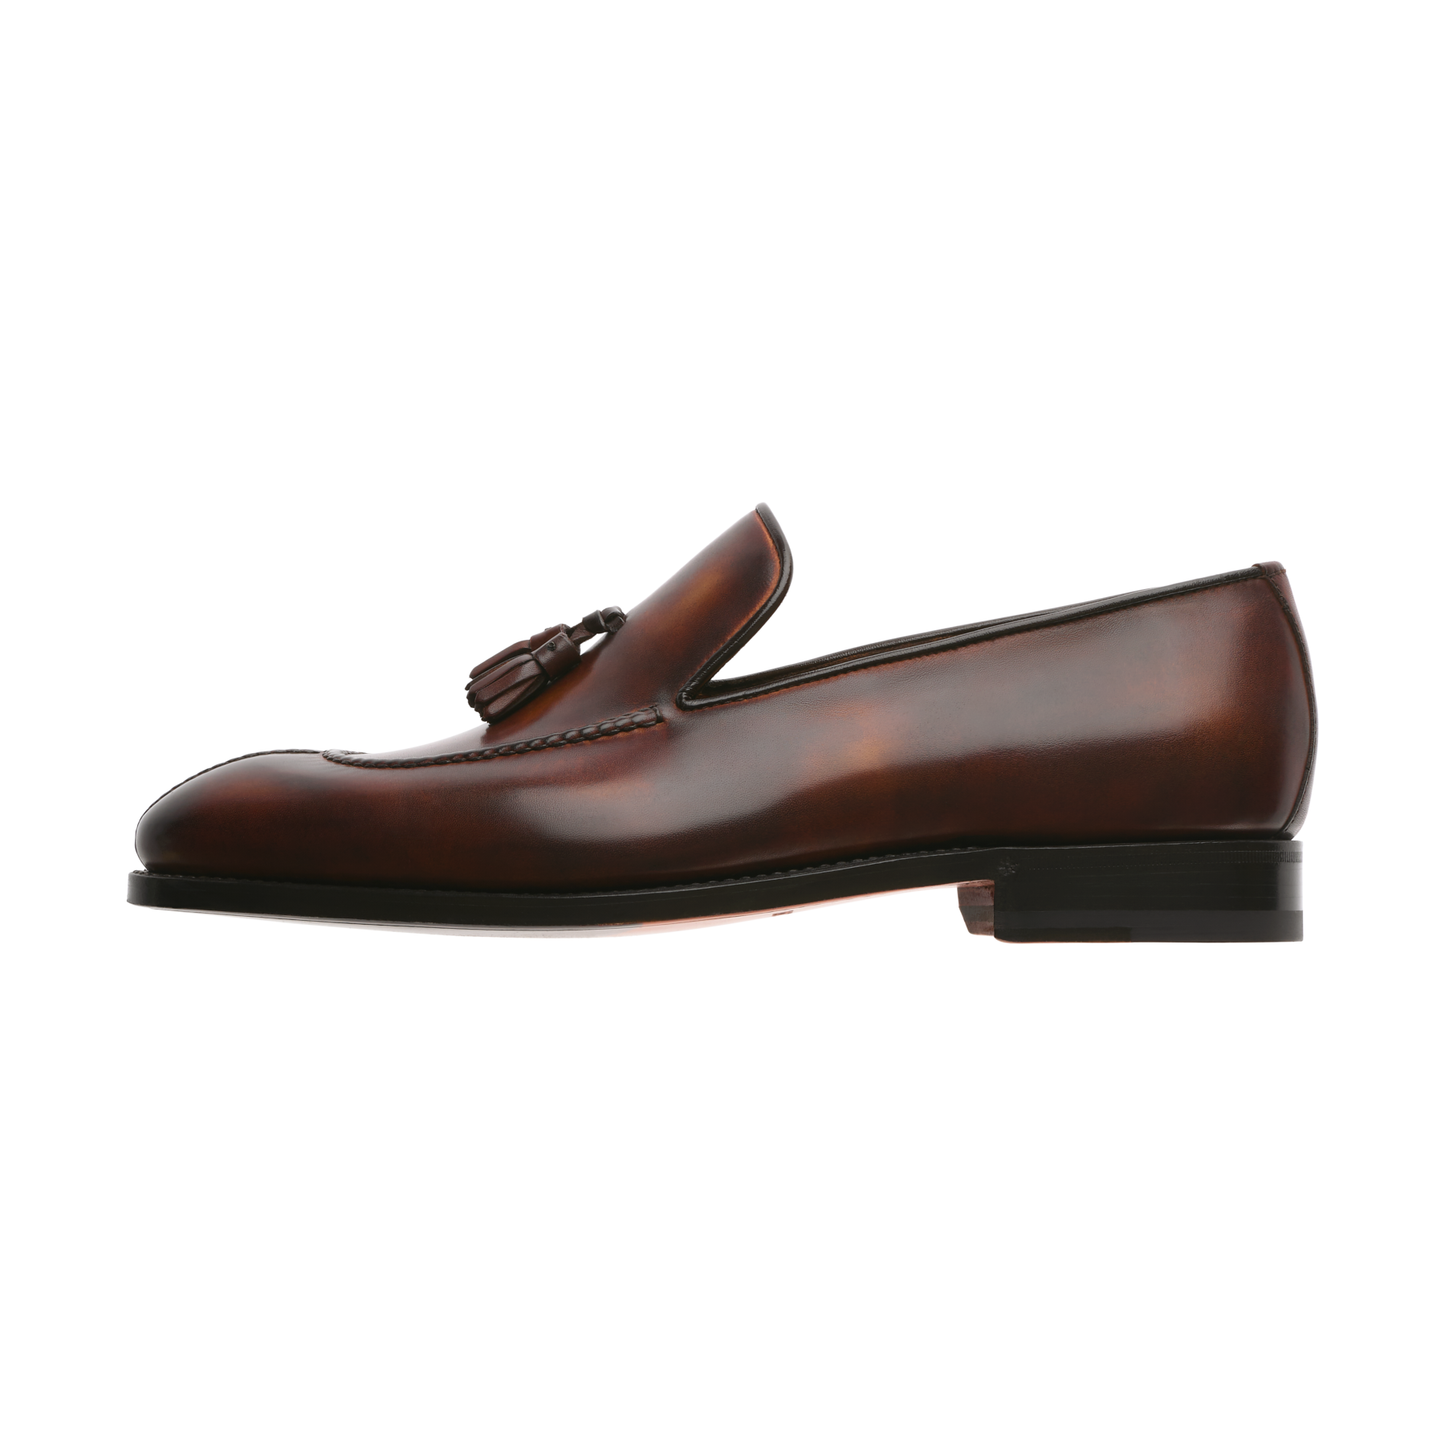 "Magnifico" Split Toe Loafer with Hand-Stitched Details